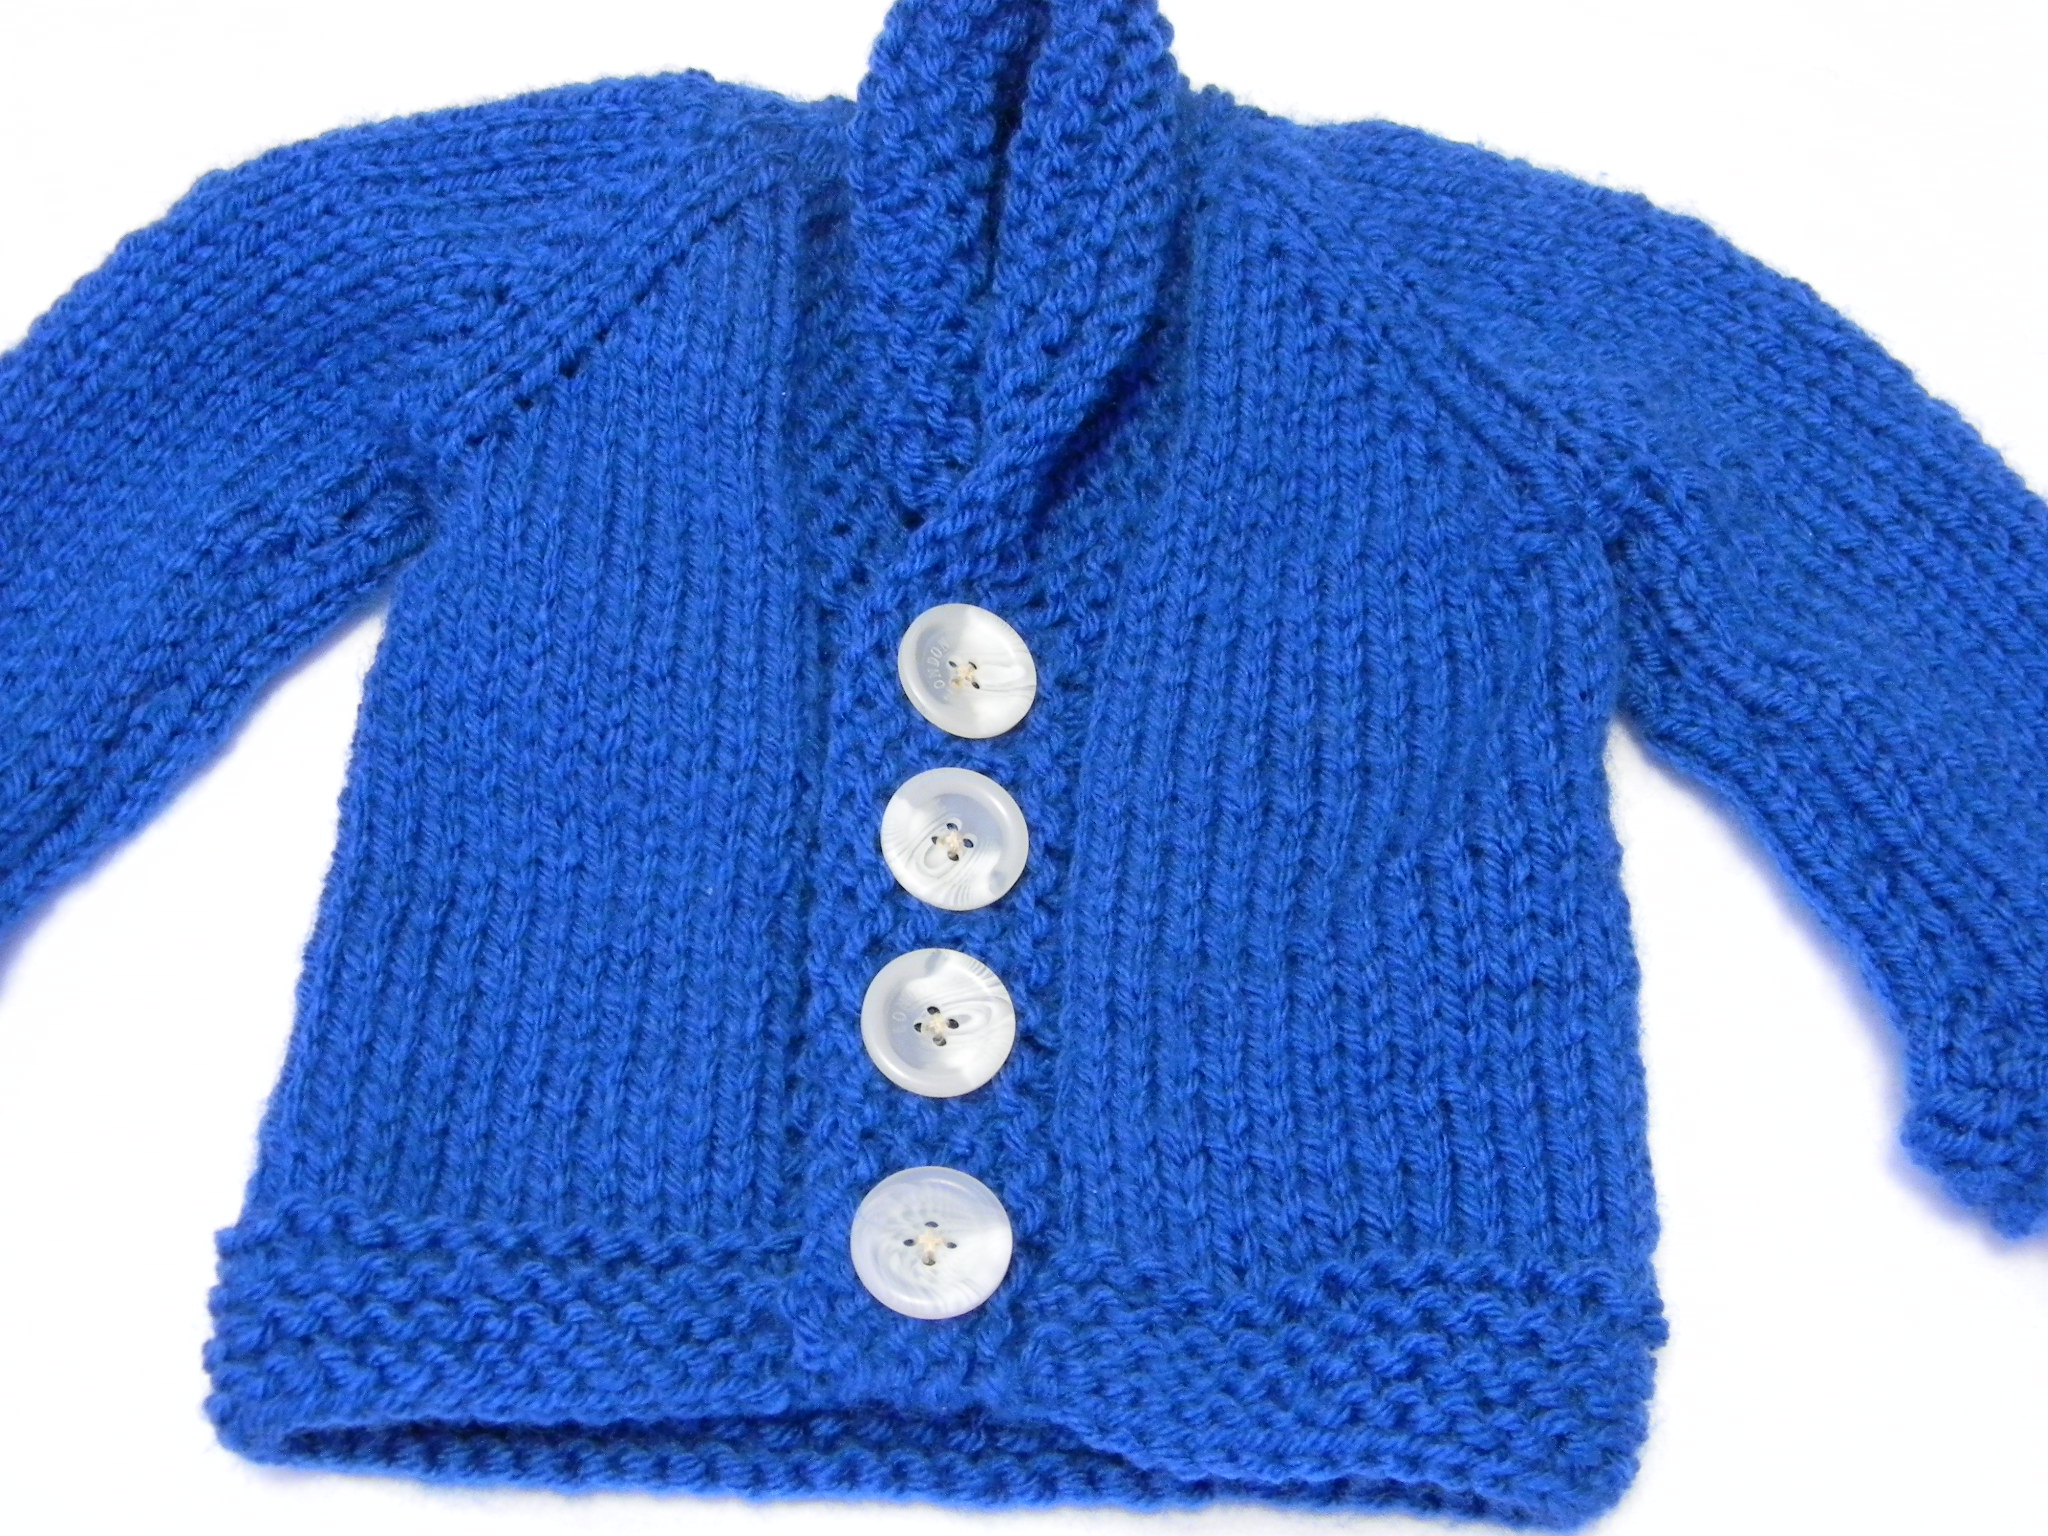 Cabled Raglan Baby Sweater -
 Knitting Daily